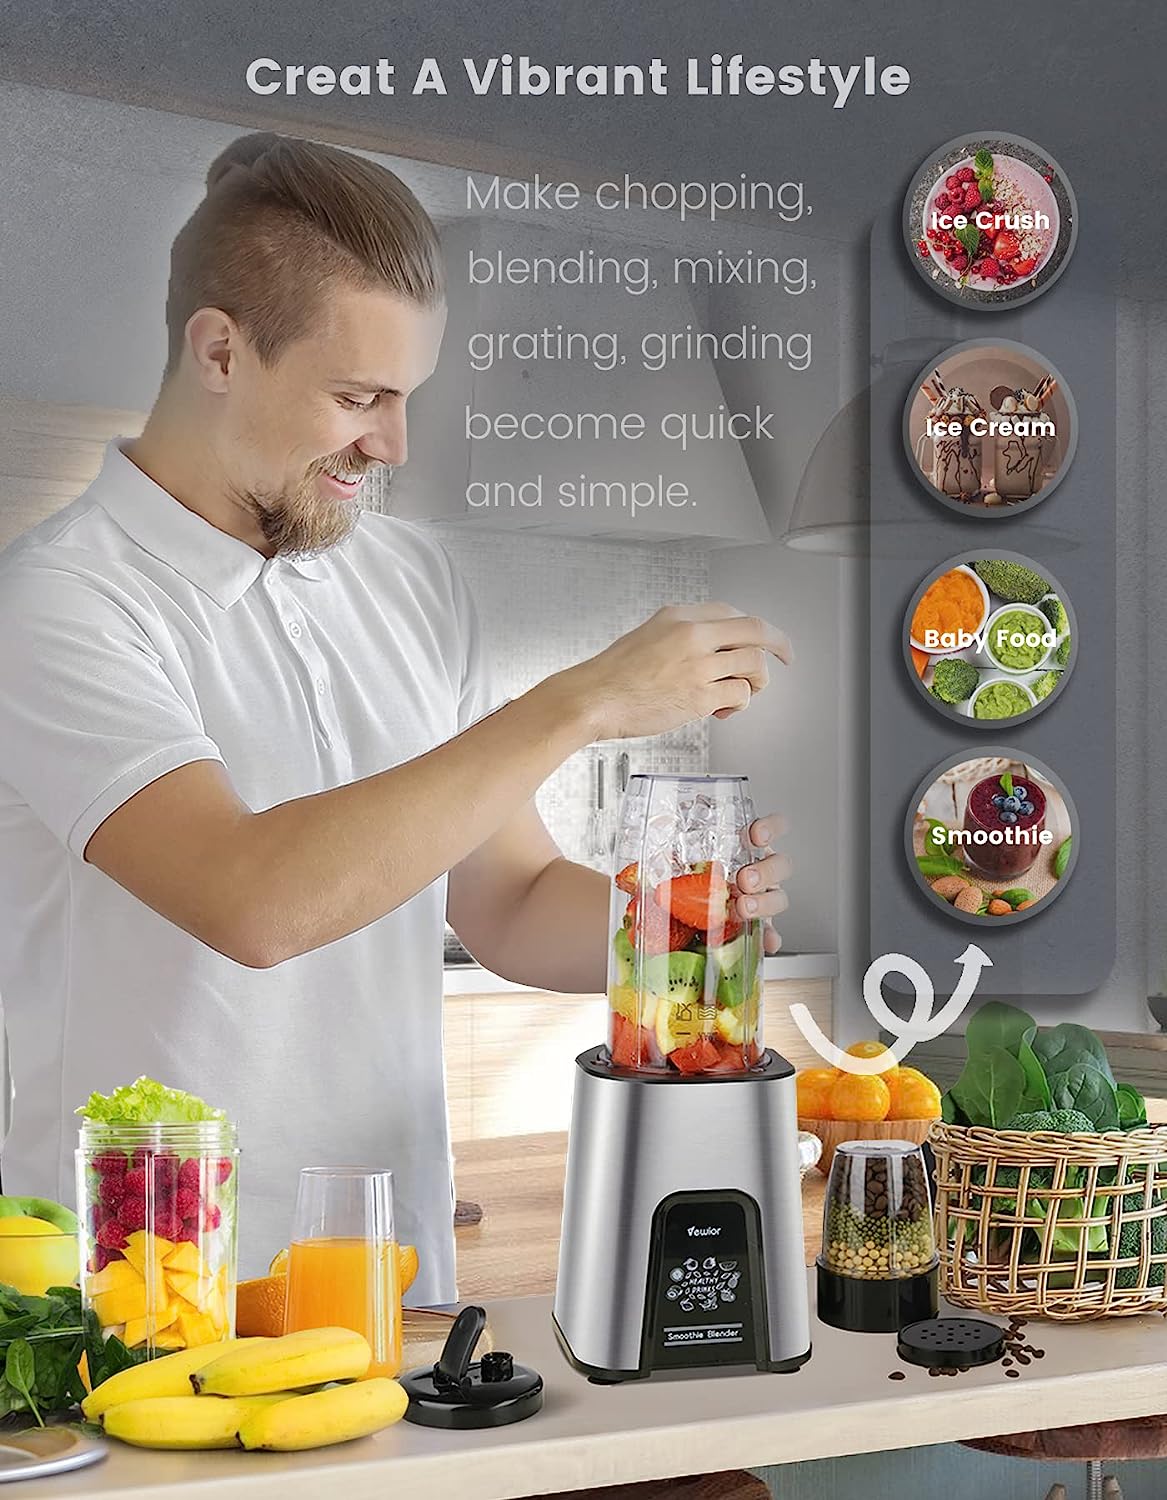 VEWIOR 850W Smoothie Blender for Shakes and Smoothies, 11 Pieces Personal Blender for Kitchen, 2*23oz+10oz Blender Cups with To-Go Lids for Fruit Vegetables, Beans, Nuts, Spices Vewior